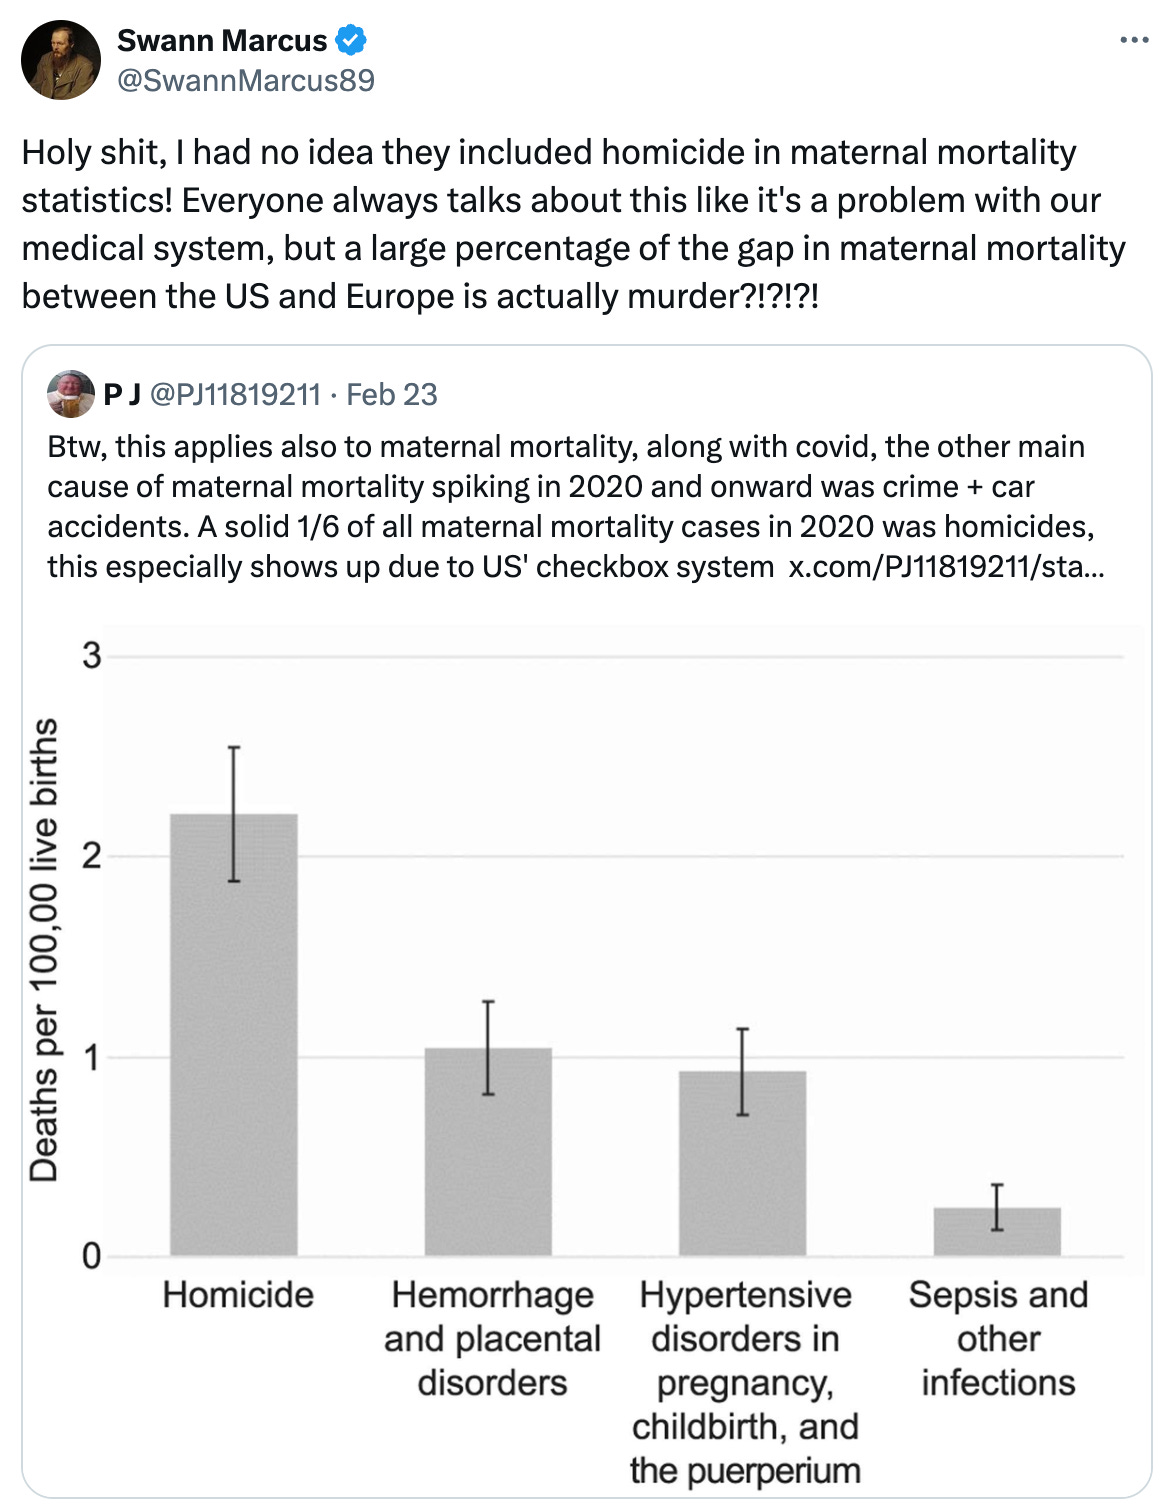 Swann Marcus @SwannMarcus89 Holy shit, I had no idea they included homicide in maternal mortality statistics! Everyone always talks about this like it's a problem with our medical system, but a large percentage of the gap in maternal mortality between the US and Europe is actually murder?!?!?! Quote P J @PJ11819211 · Feb 23 Btw, this applies also to maternal mortality, along with covid, the other main cause of maternal mortality spiking in 2020 and onward was crime + car accidents. A solid 1/6 of all maternal mortality cases in 2020 was homicides, this especially shows up due to US' checkbox system  x.com/PJ11819211/sta…